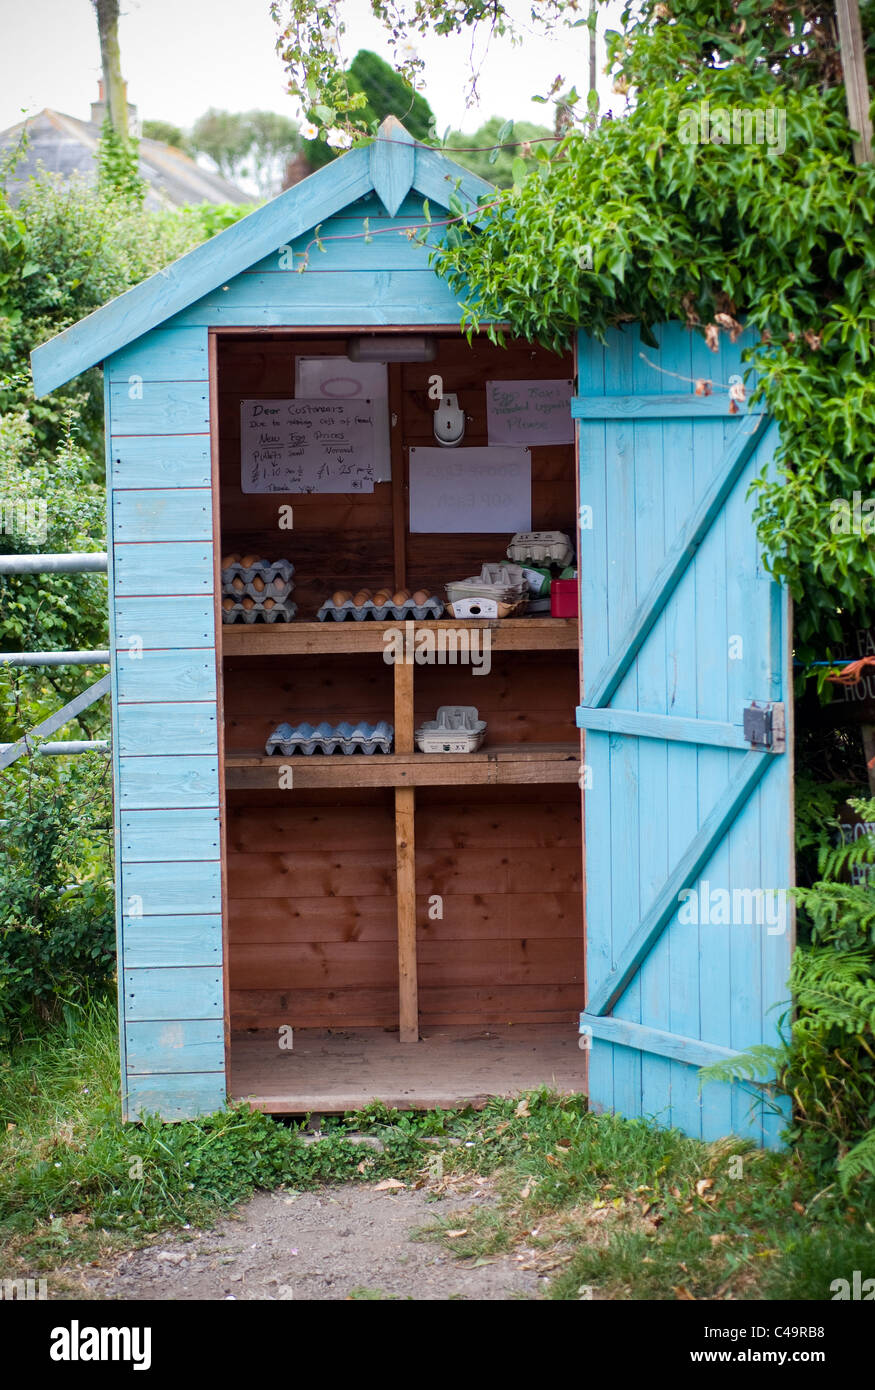 Small Rural Business In Garden Shed Selling Eggs Start A Cottage